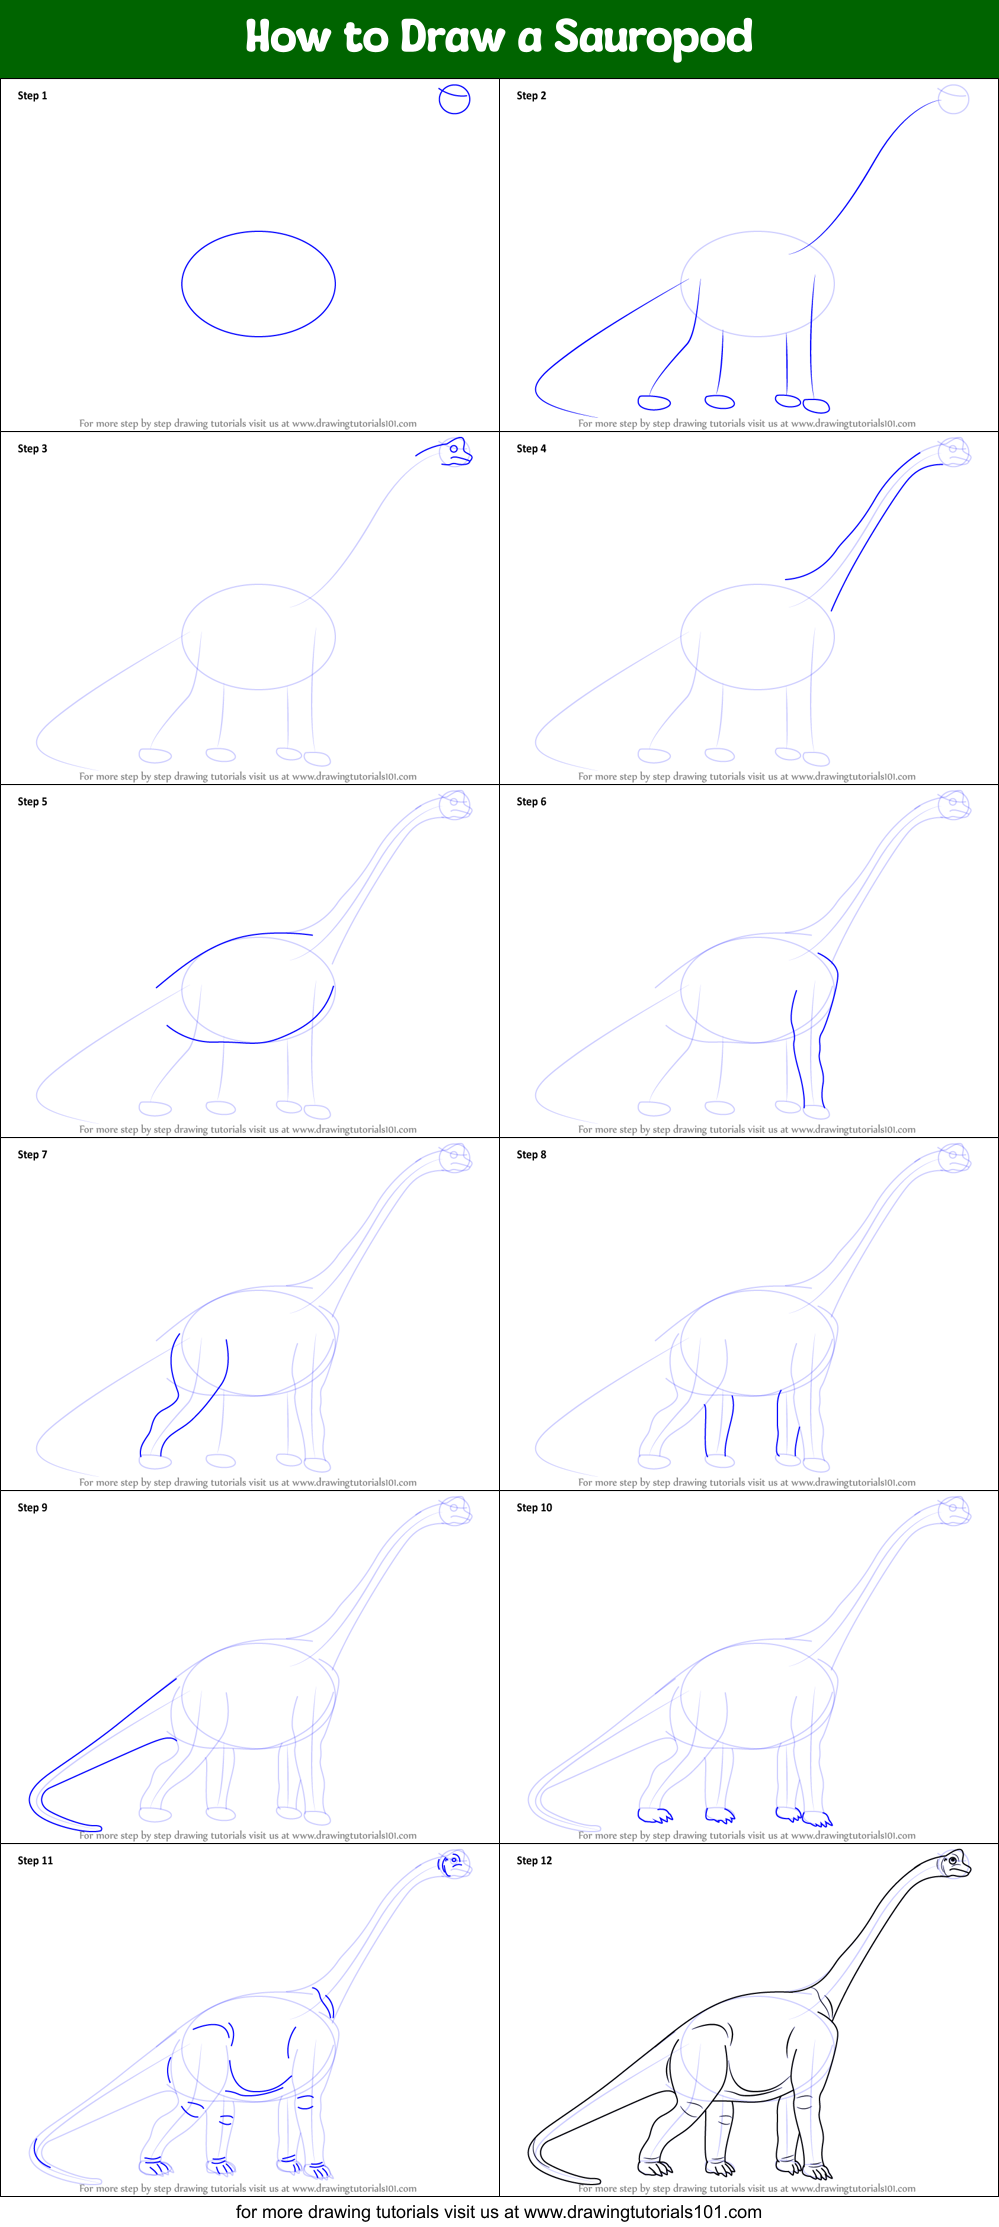 How to Draw a Sauropod printable step by step drawing